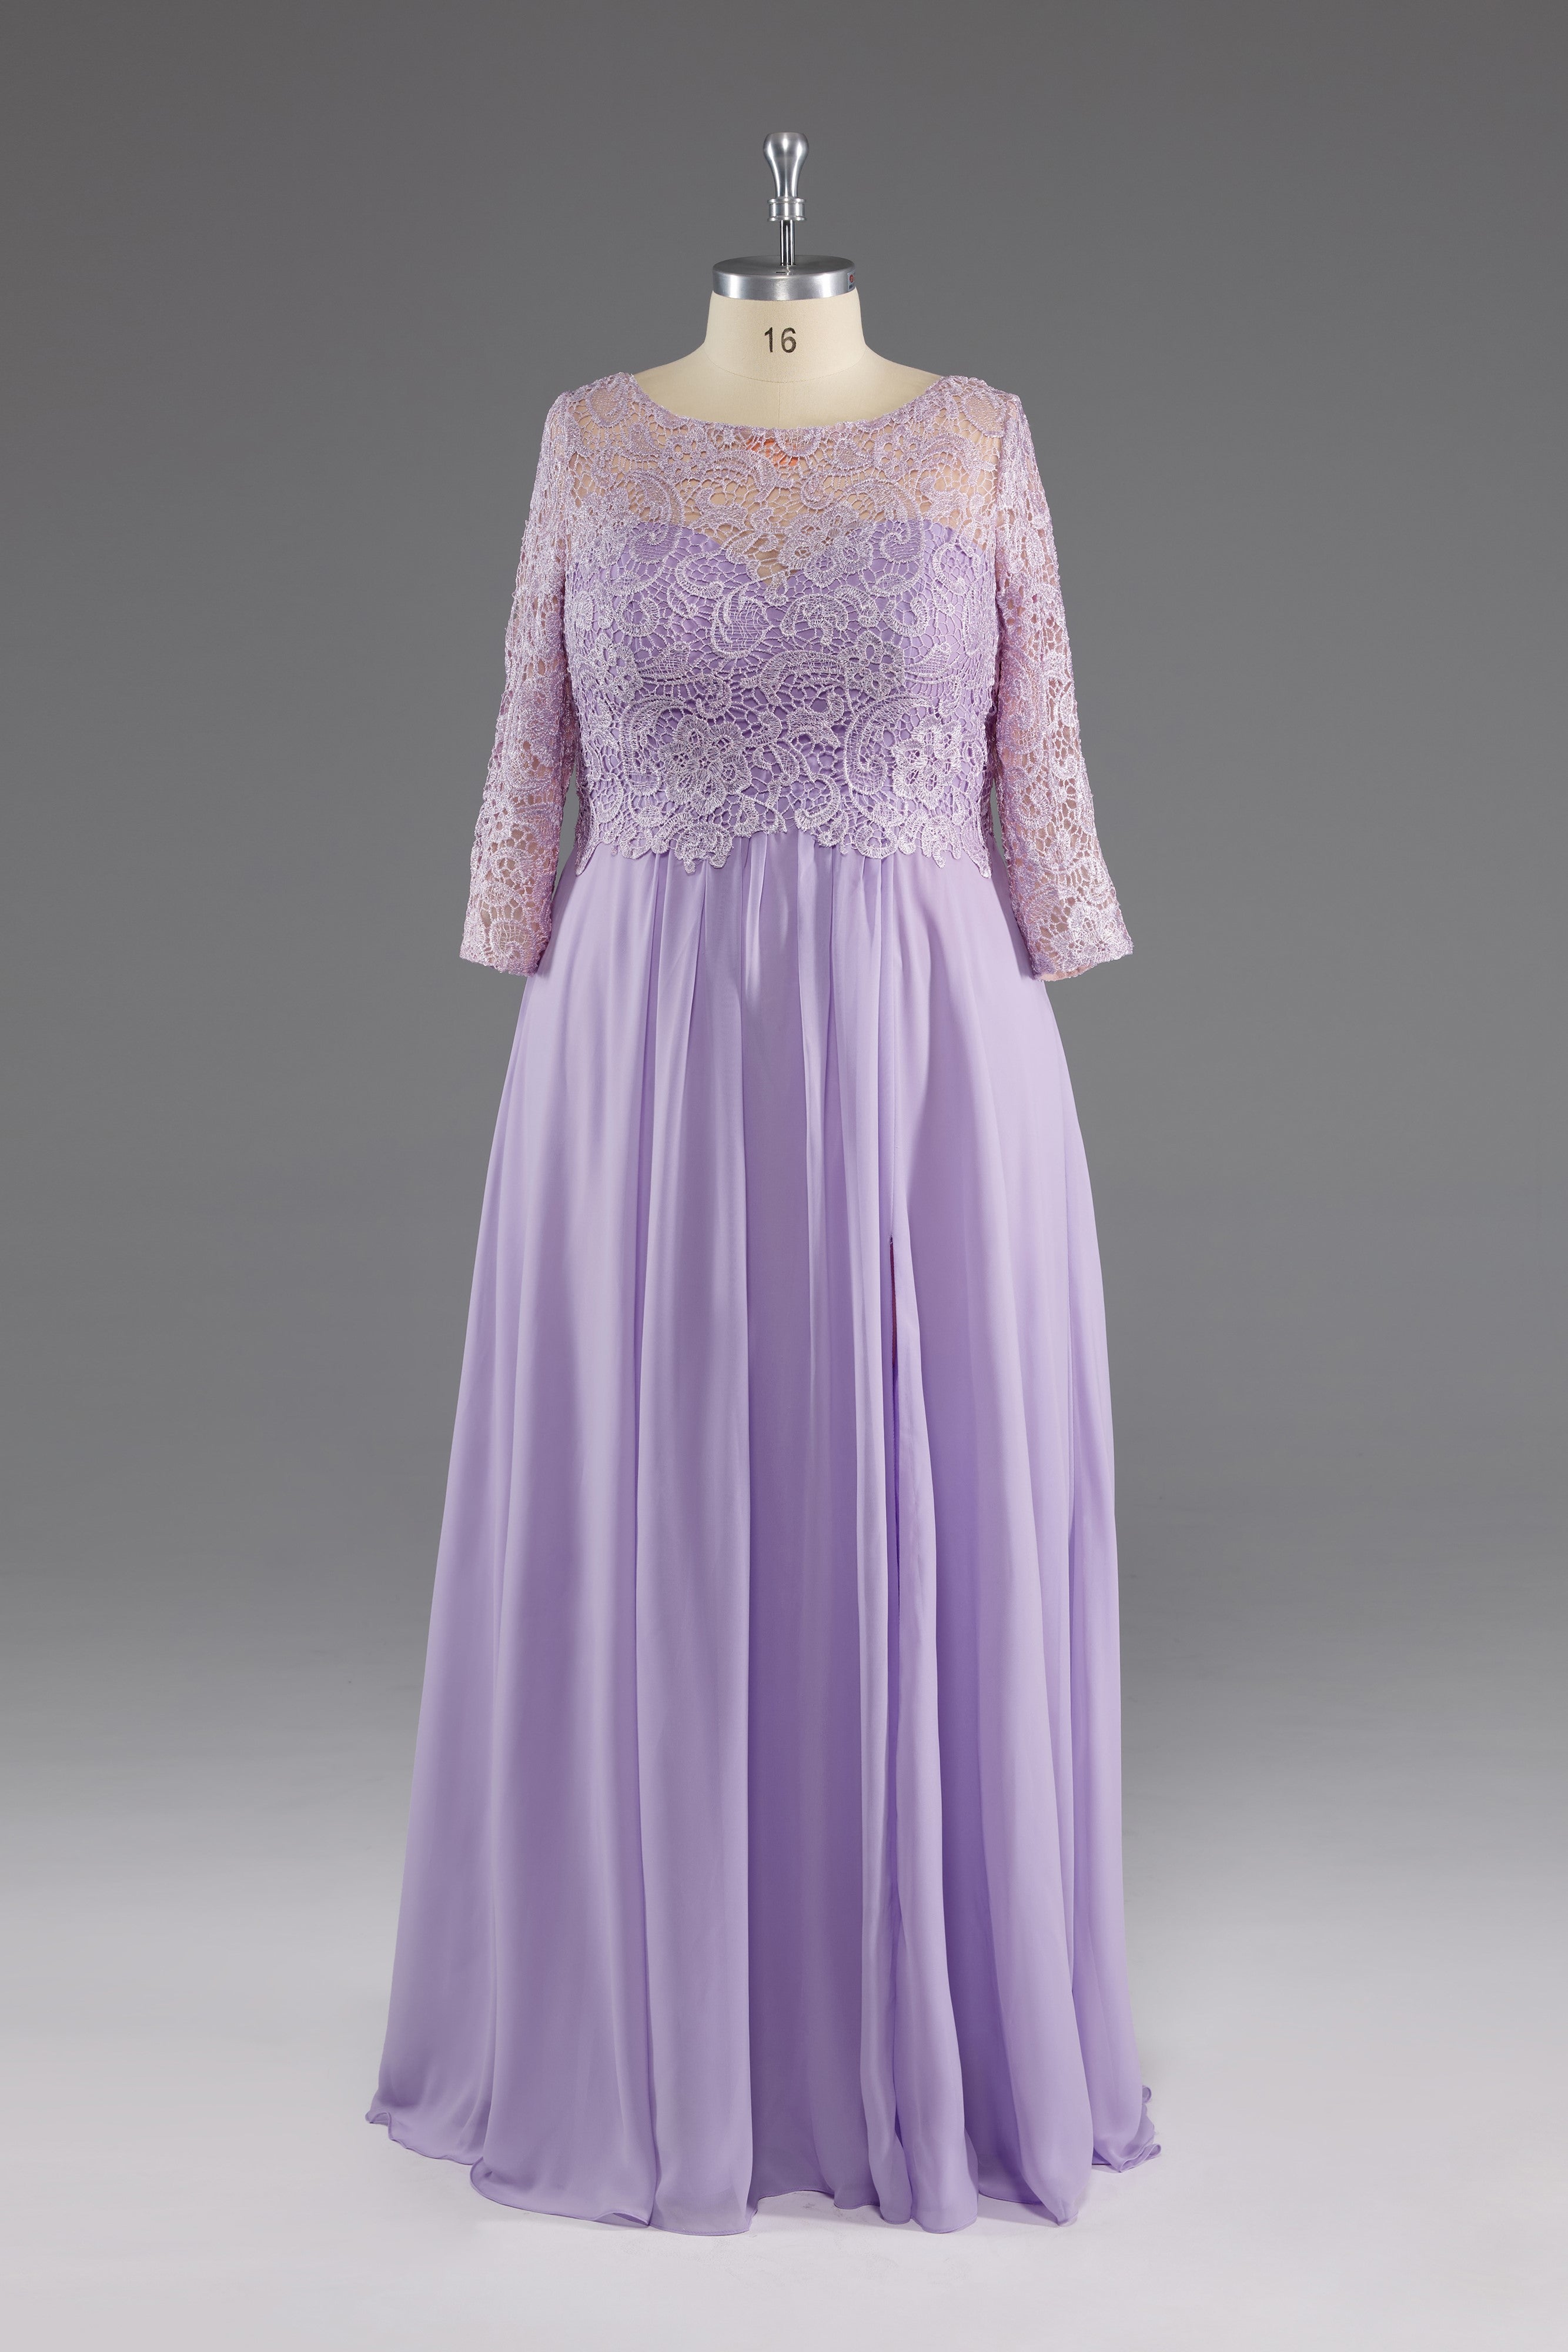 Bridesmaids Dress Designs, Lilac A-Line 3/4 Sleeves Scoop Lace Prom Dress